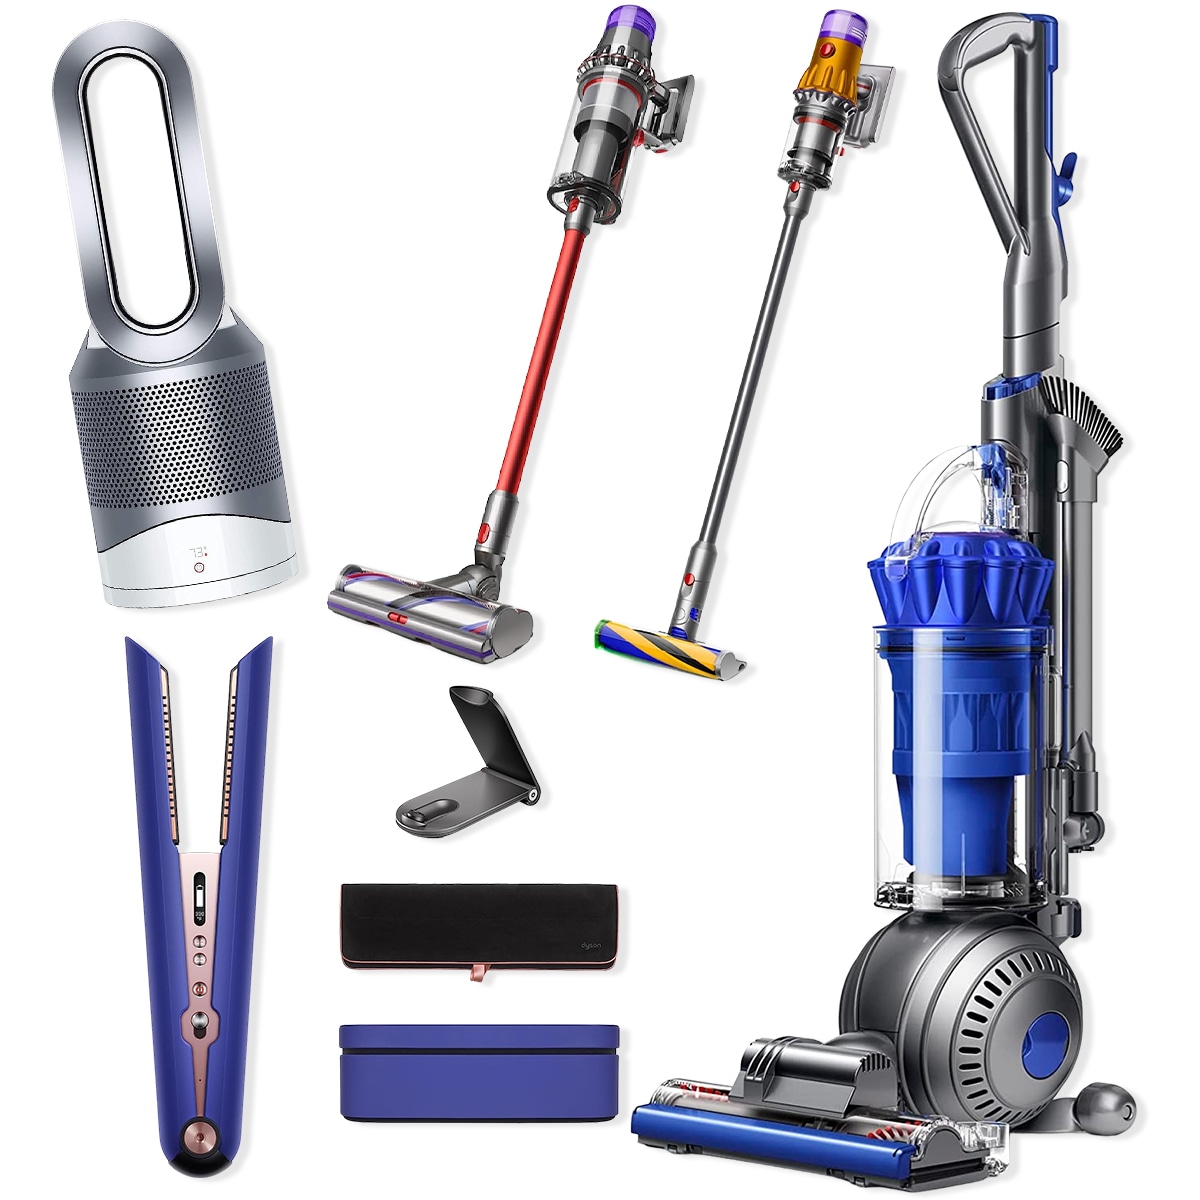 hijack residue Devastate Save $250 on Dyson Hair Tools, Vacuums, and Air Purifiers on Prime Day - E!  Online